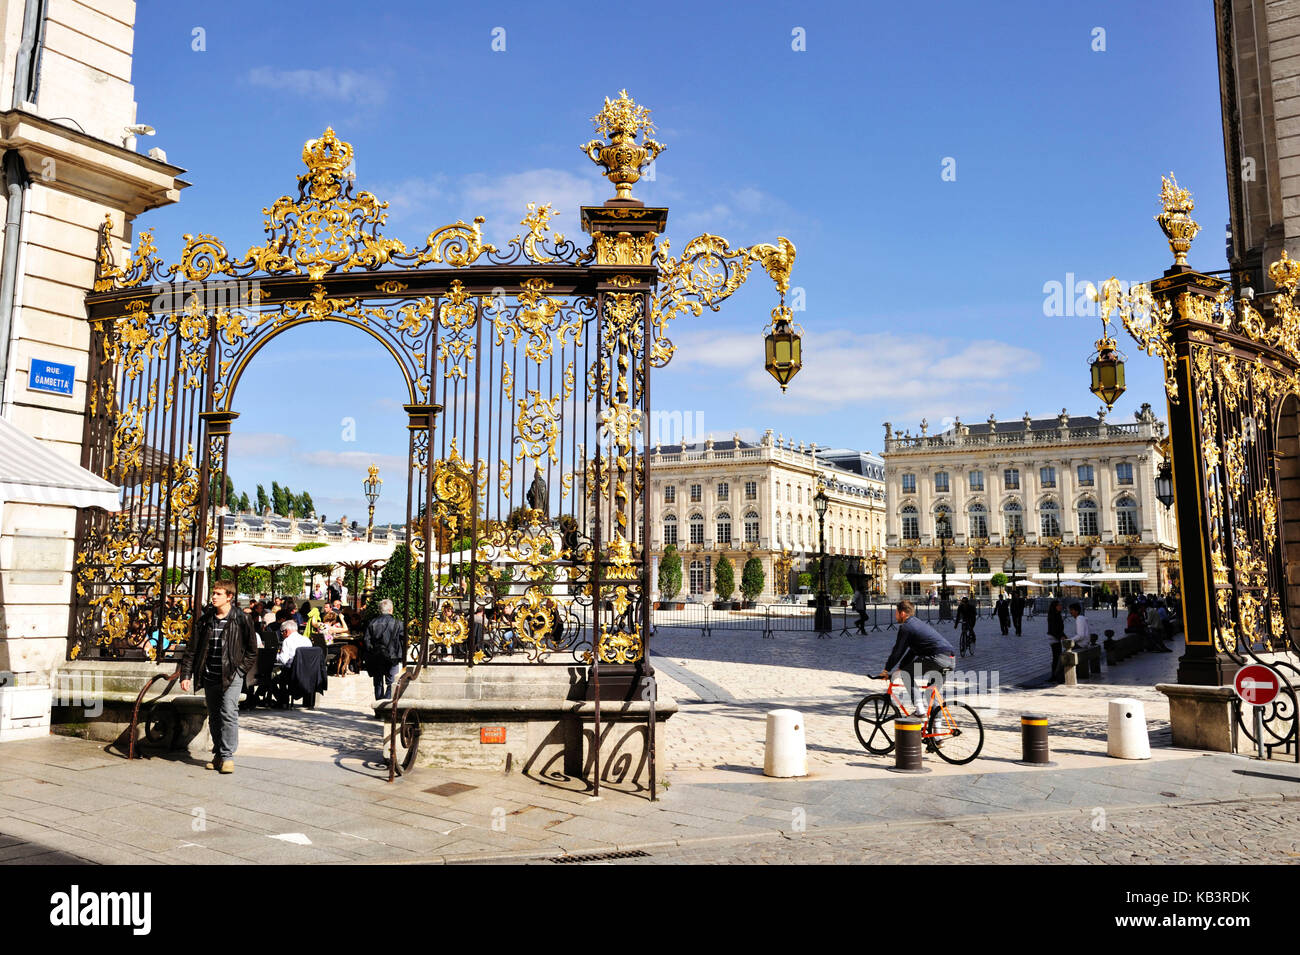 France, Meurthe et Moselle, Nancy, Place Stanislas (former Place Royale) built by Stanislas Leszczynski in the 18th century, classifed as World Heritage by UNESCO, golden gate by Jean Lamour Stock Photo